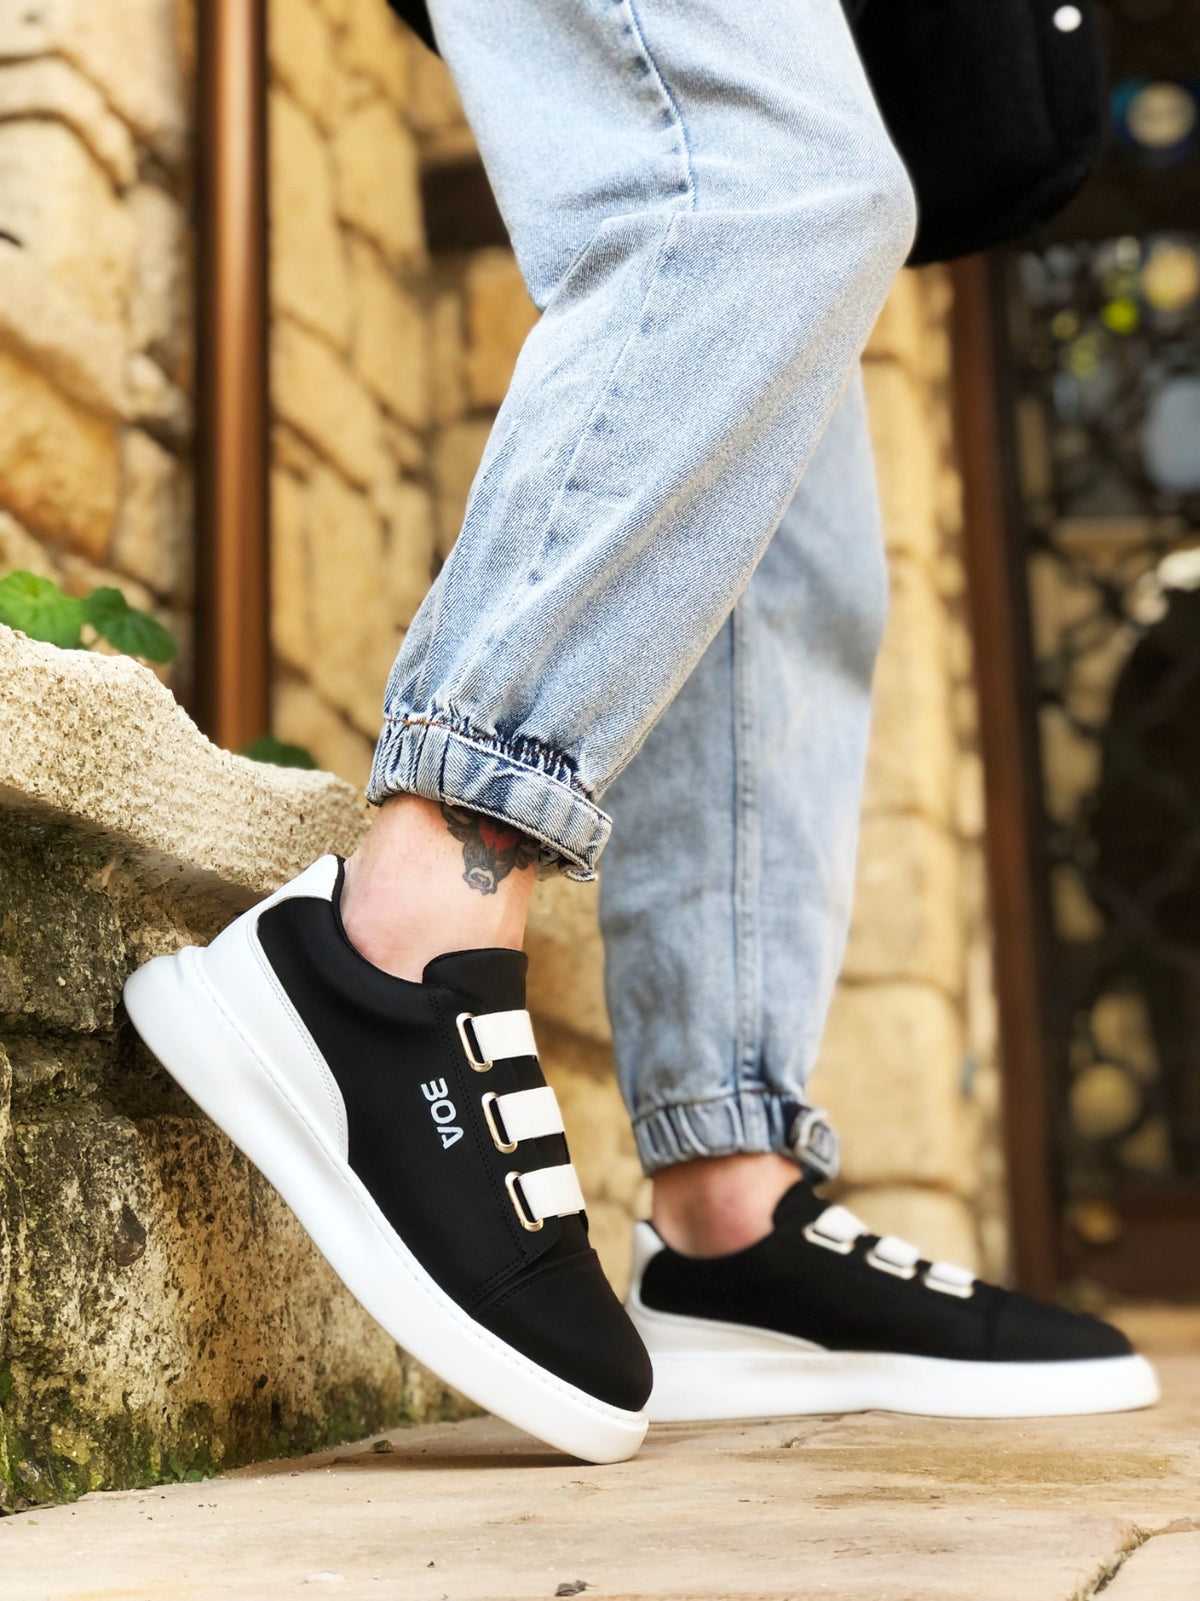 BA0329 3-Stripes Black White Detailed Thick Sole Men's Casual Shoes - STREETMODE™